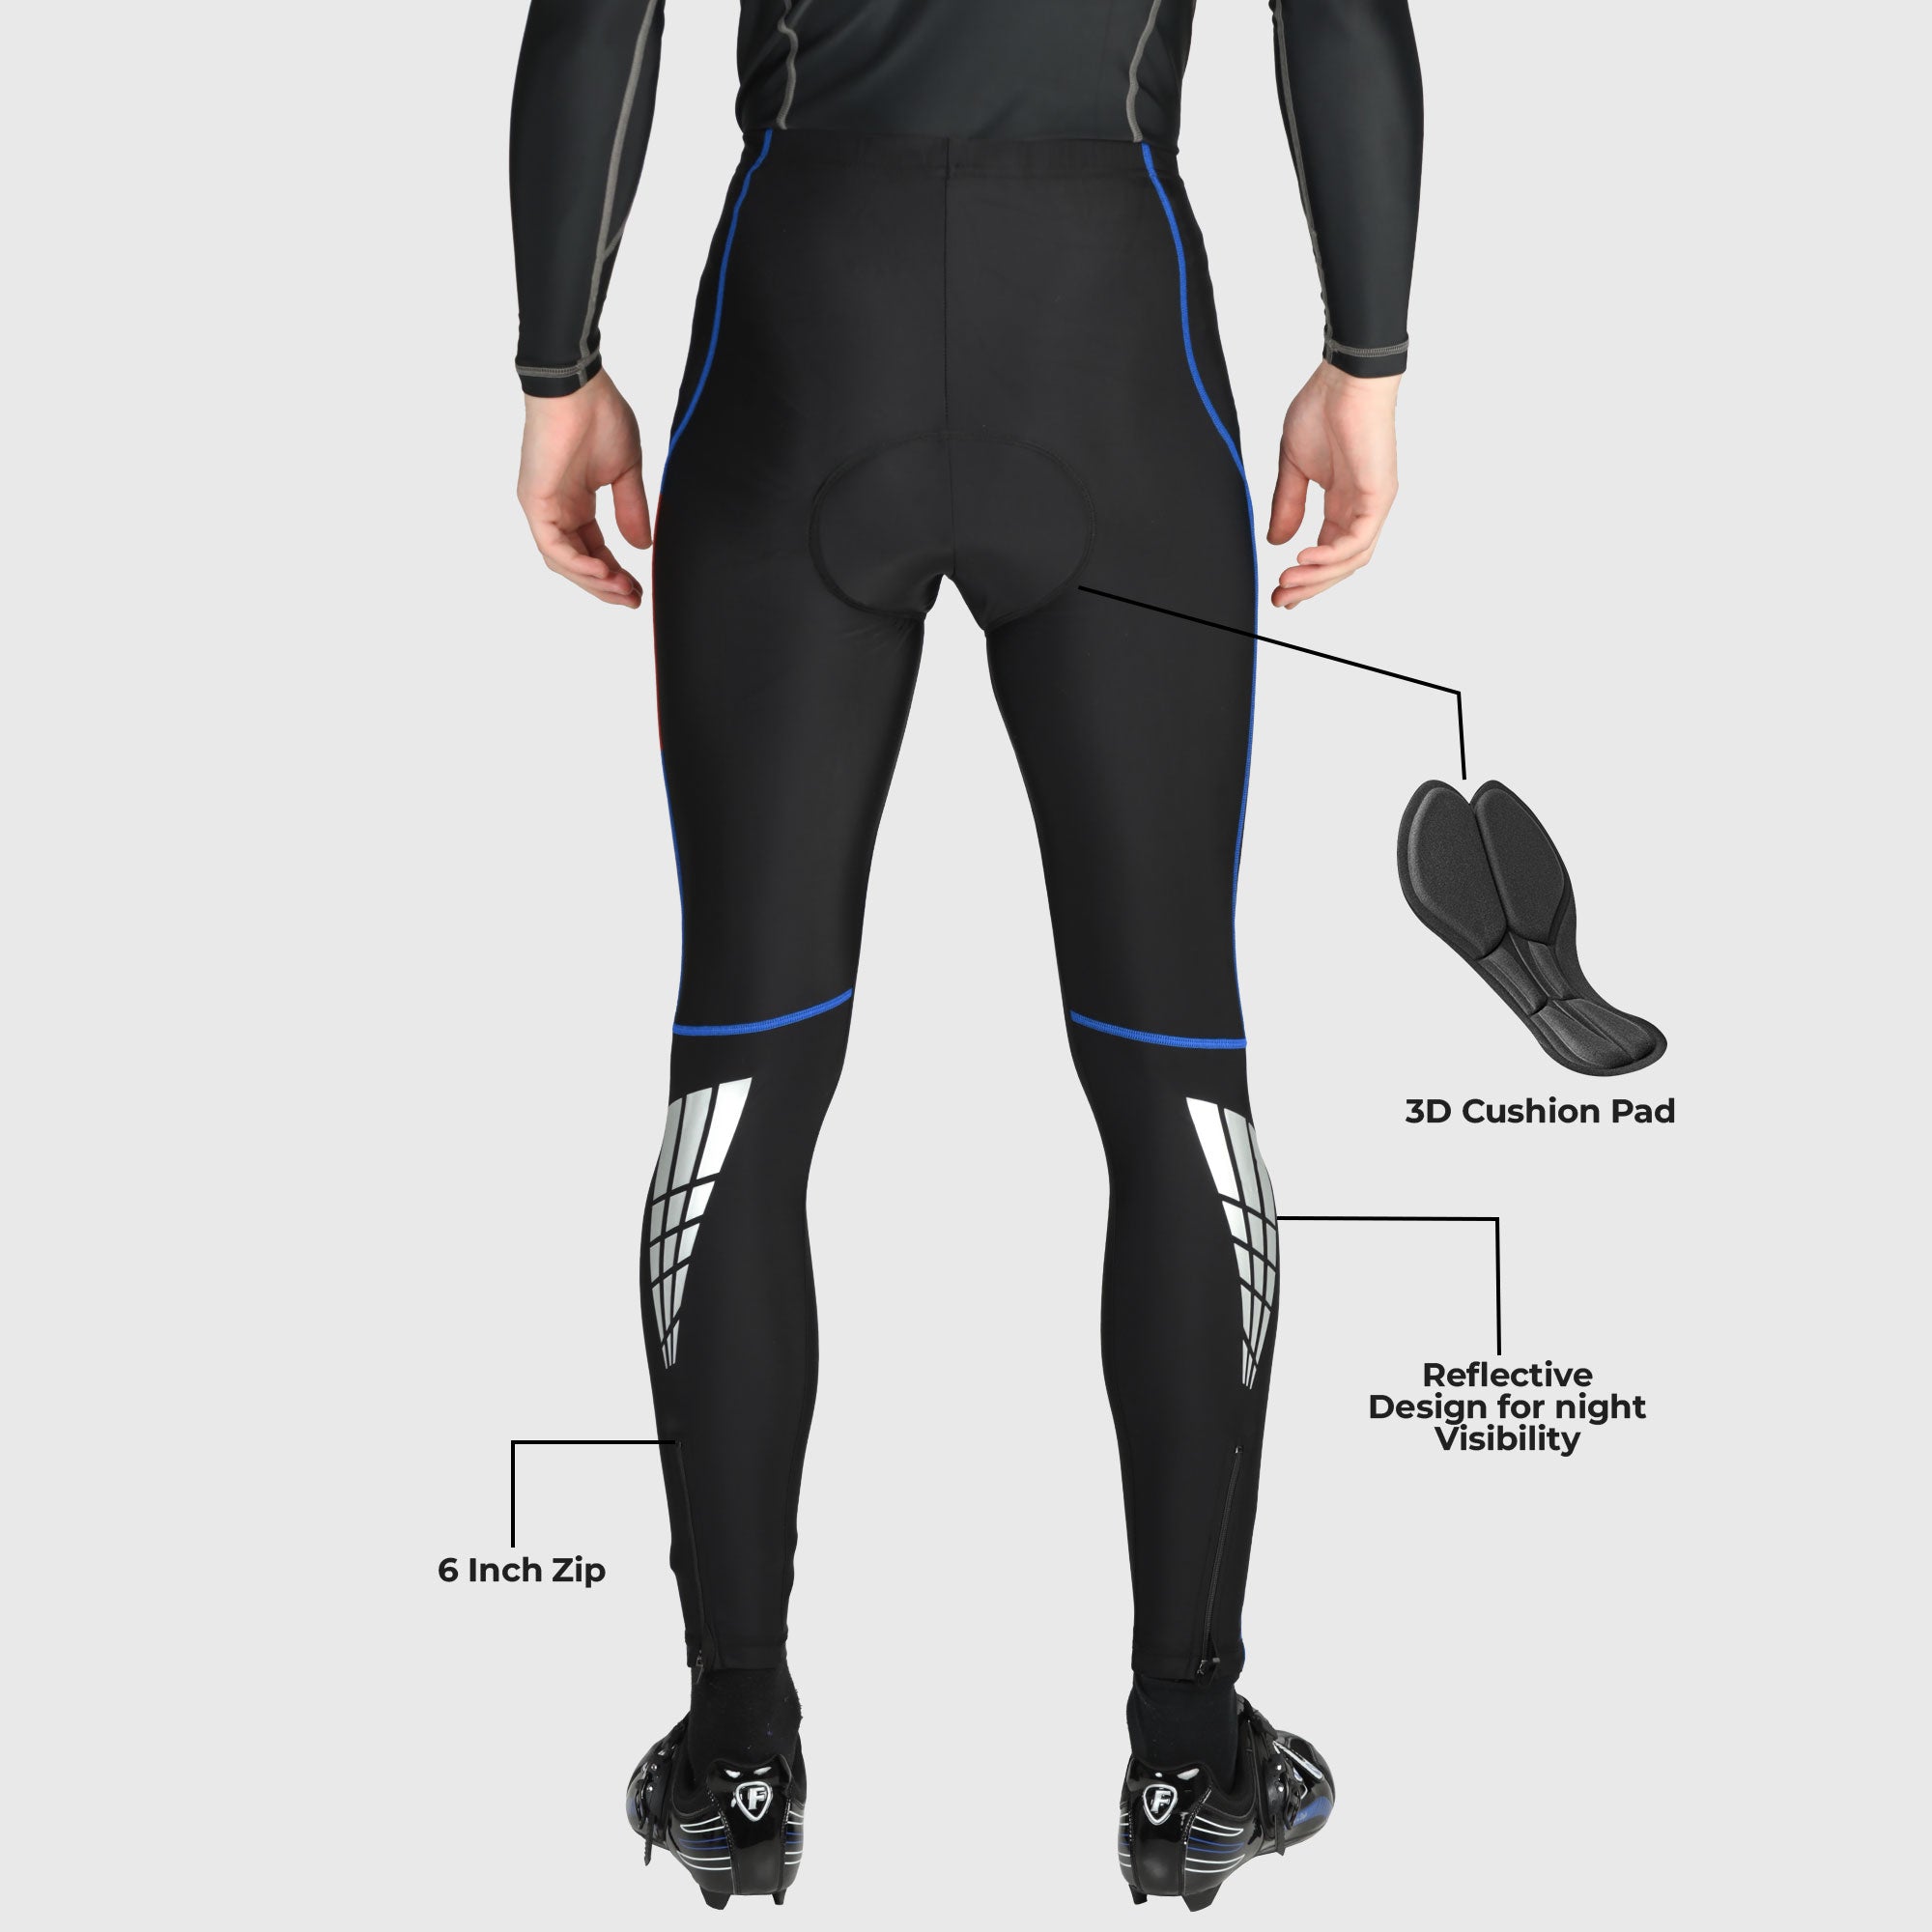 Fdx Heatchaser Men's Compression Cycling Tights Black, Red & Blue